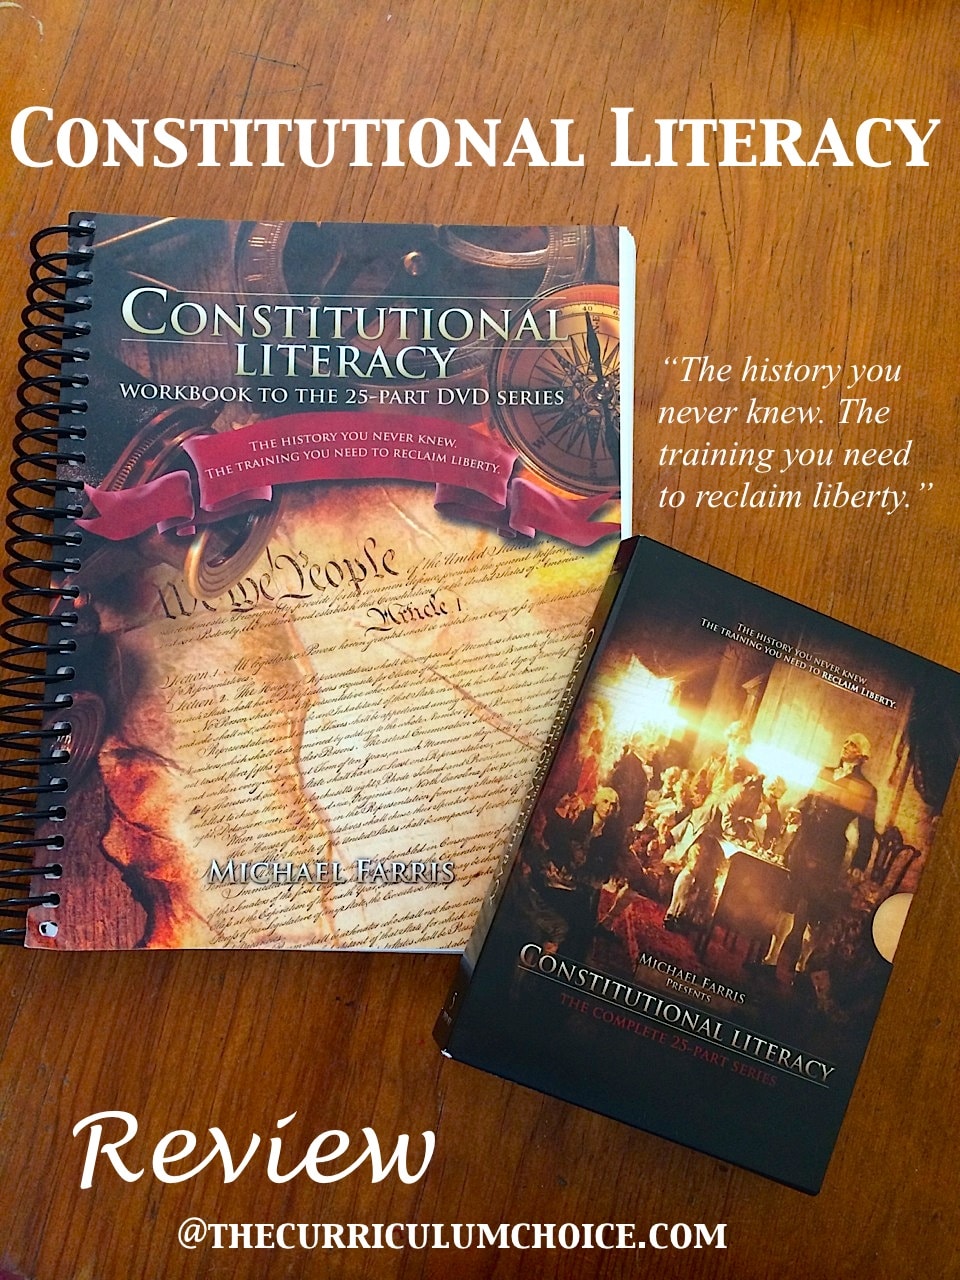 Constitutional Literacy Review